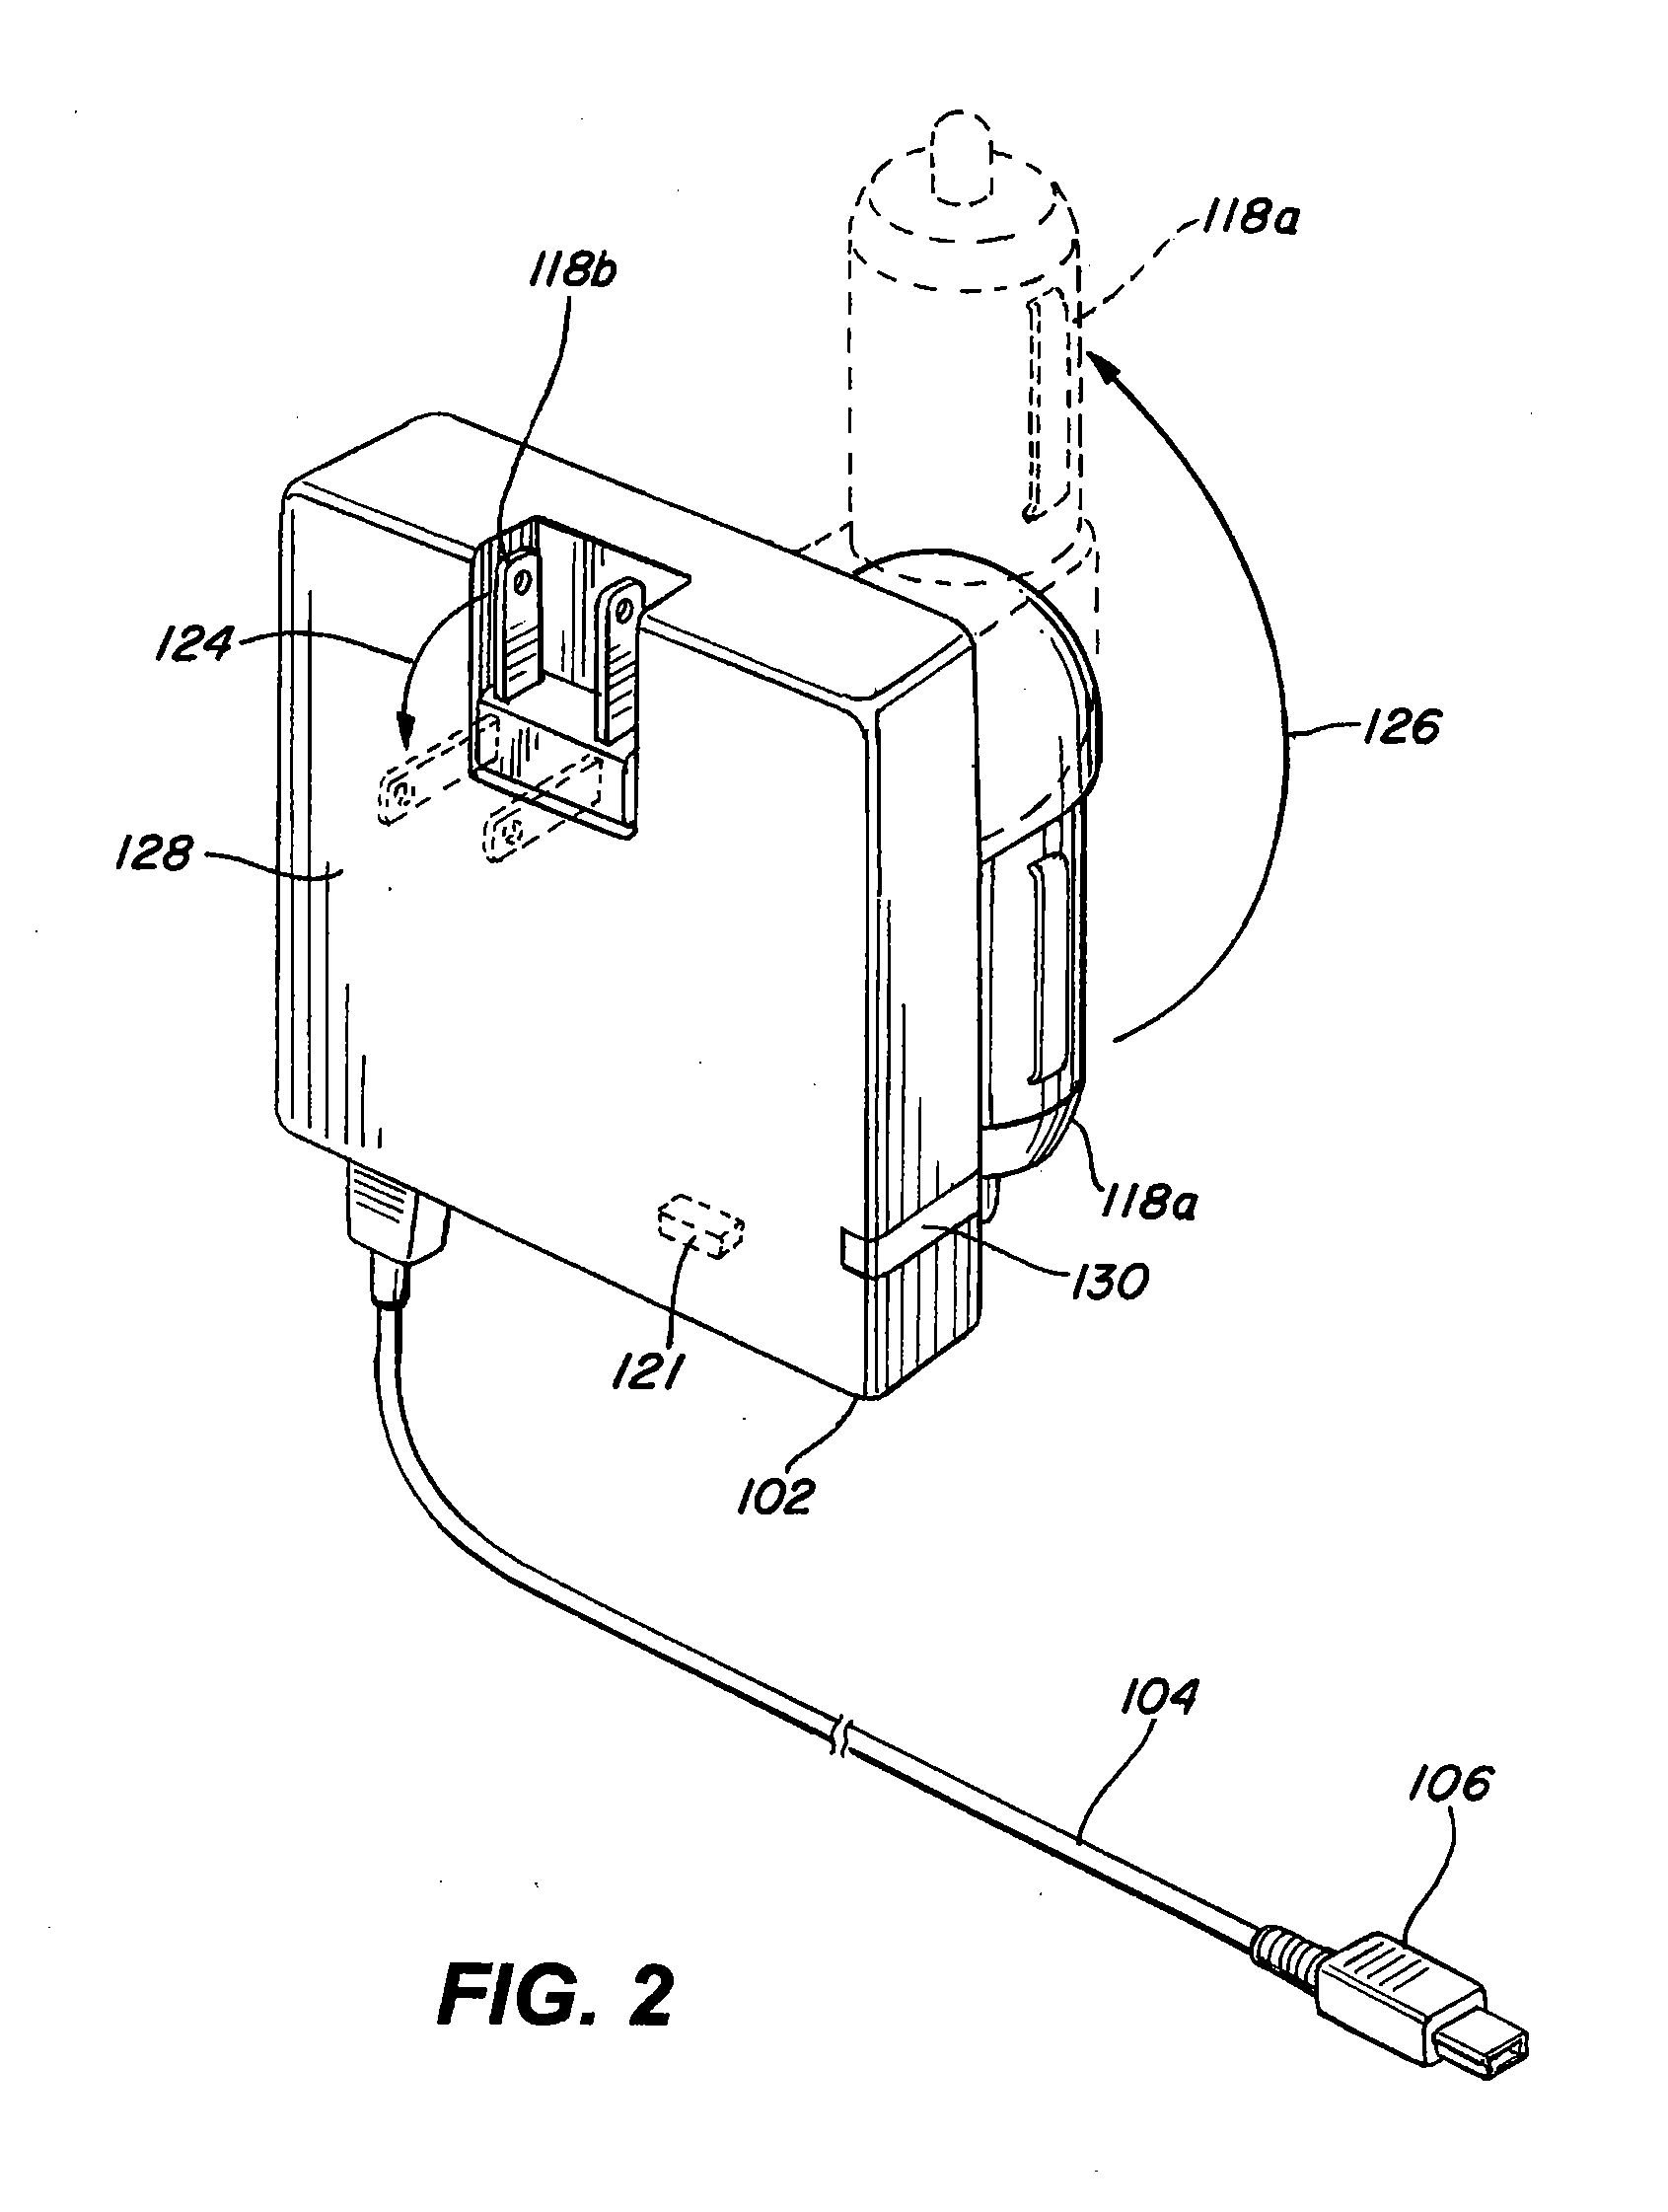 Method and apparatus for recharging batteries in a more efficient manner